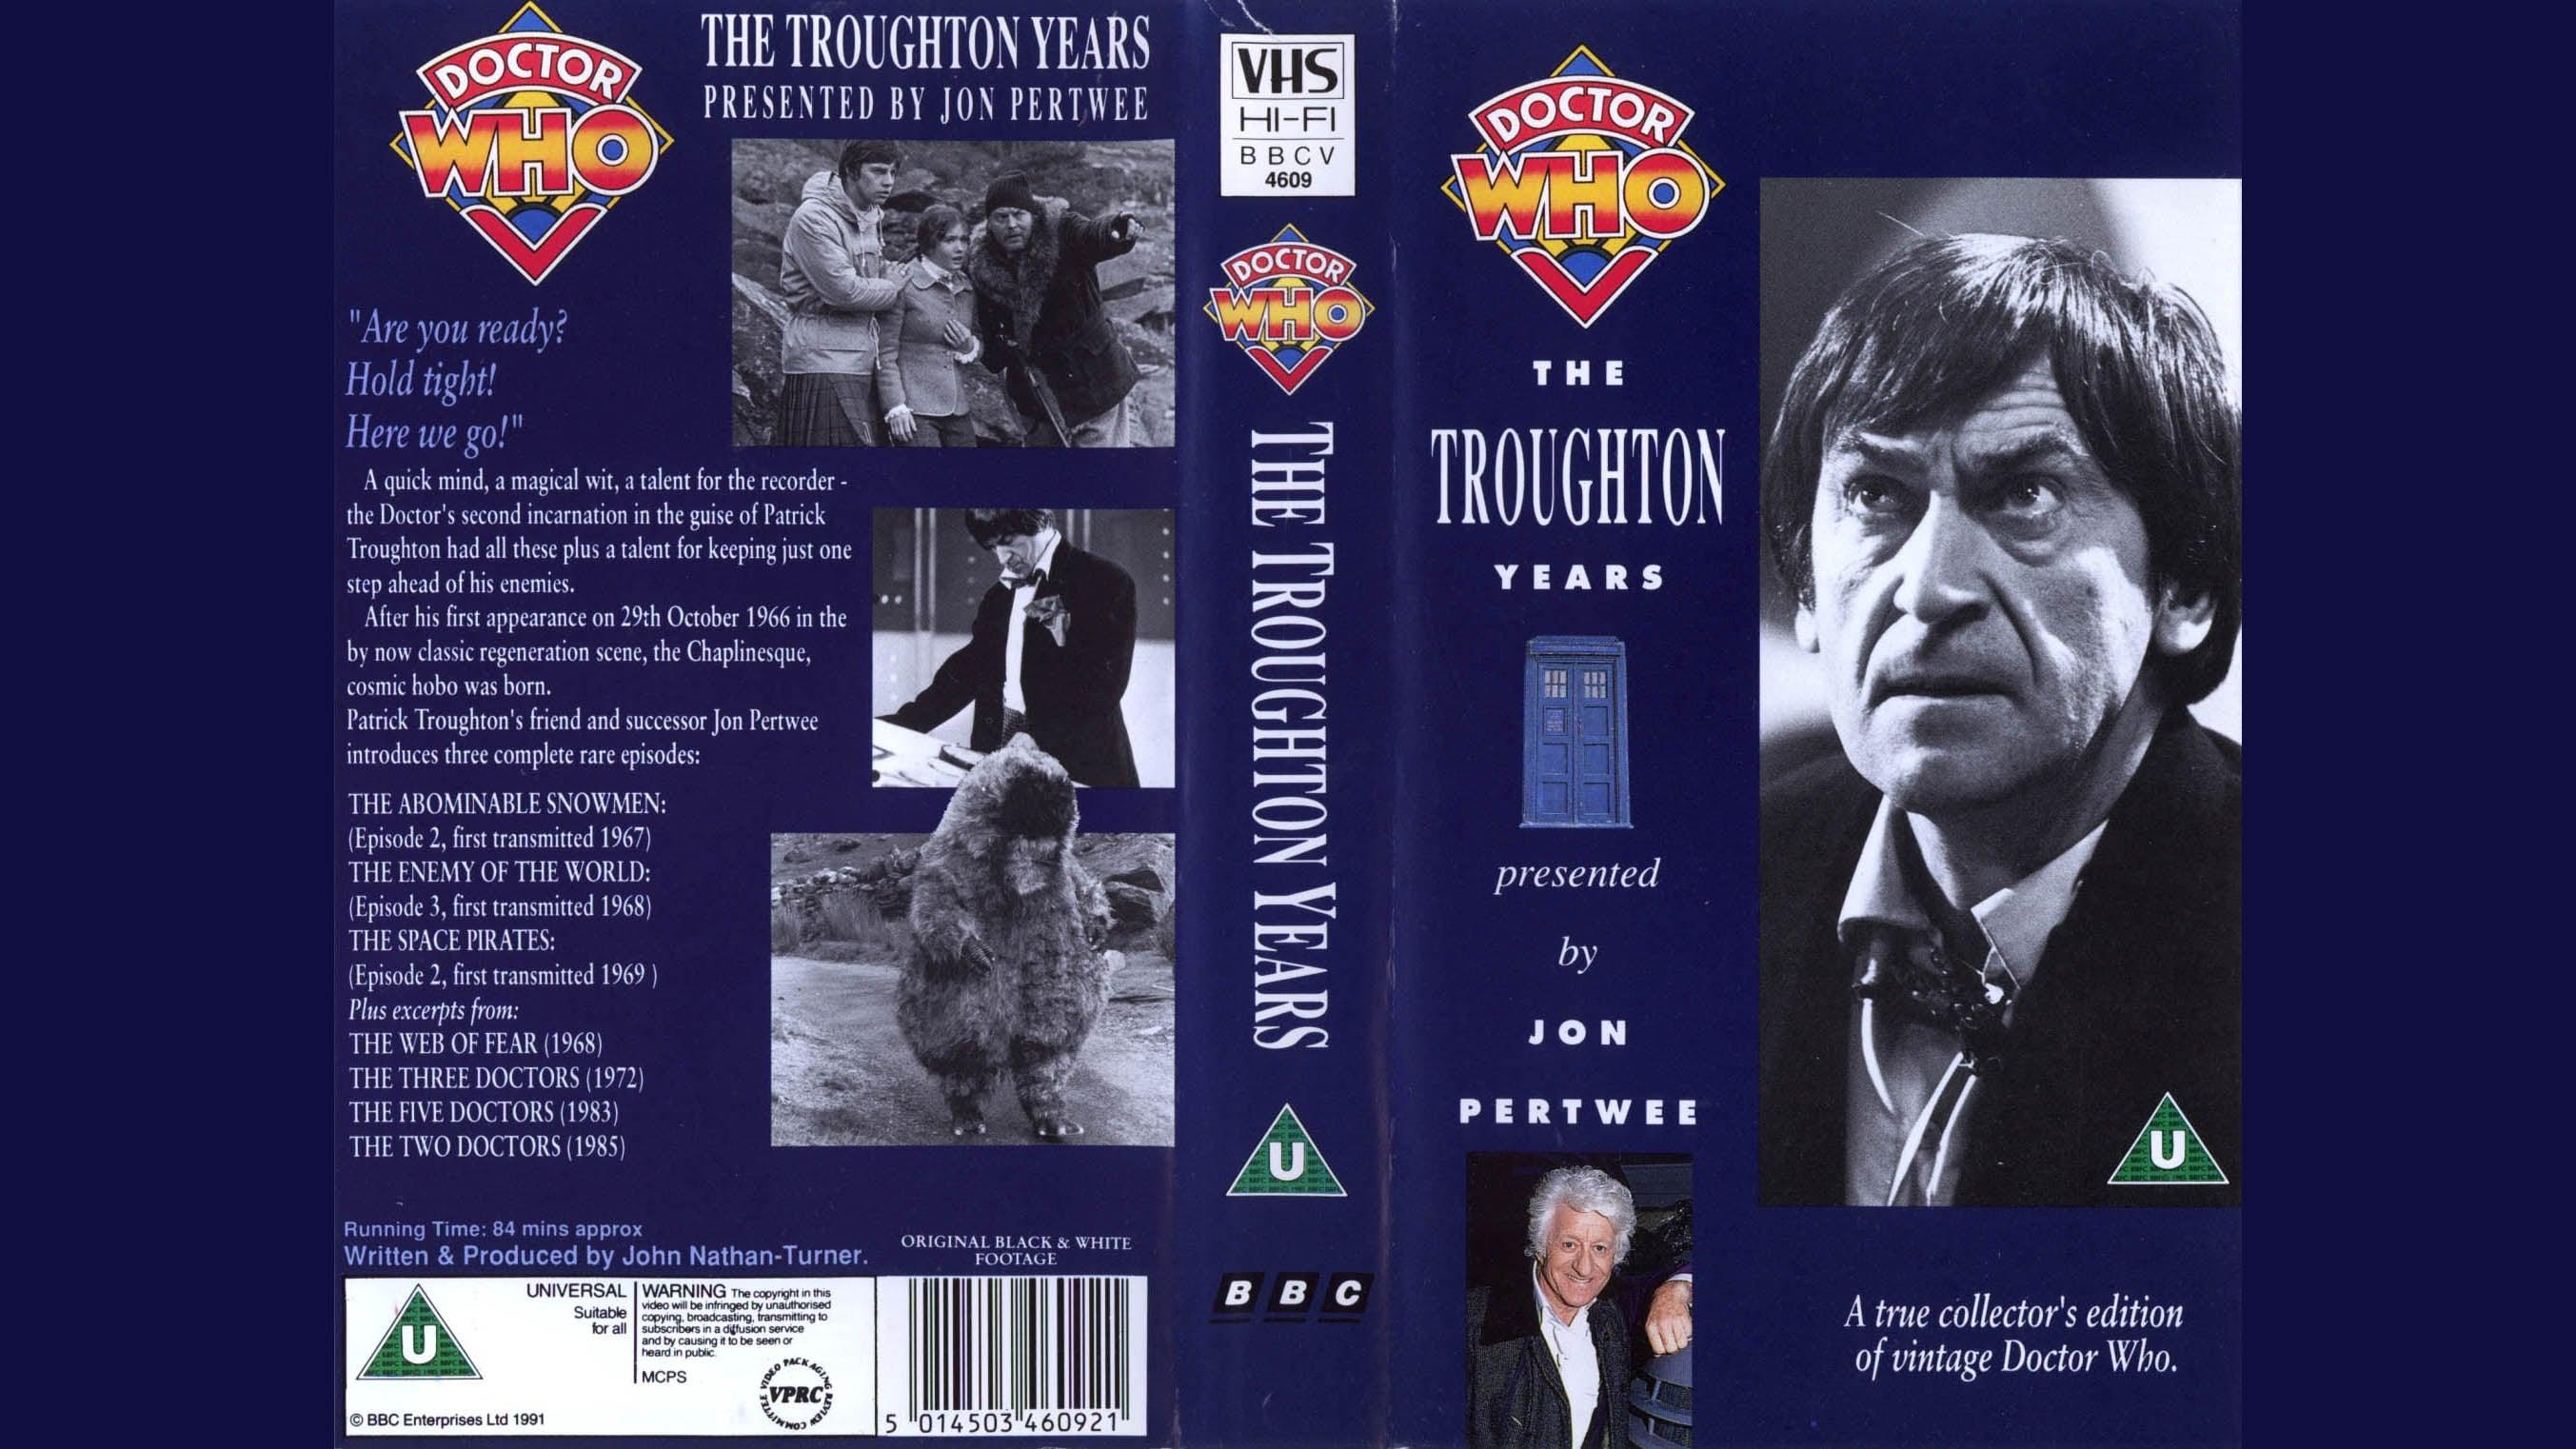 Doctor Who: The Troughton Years backdrop